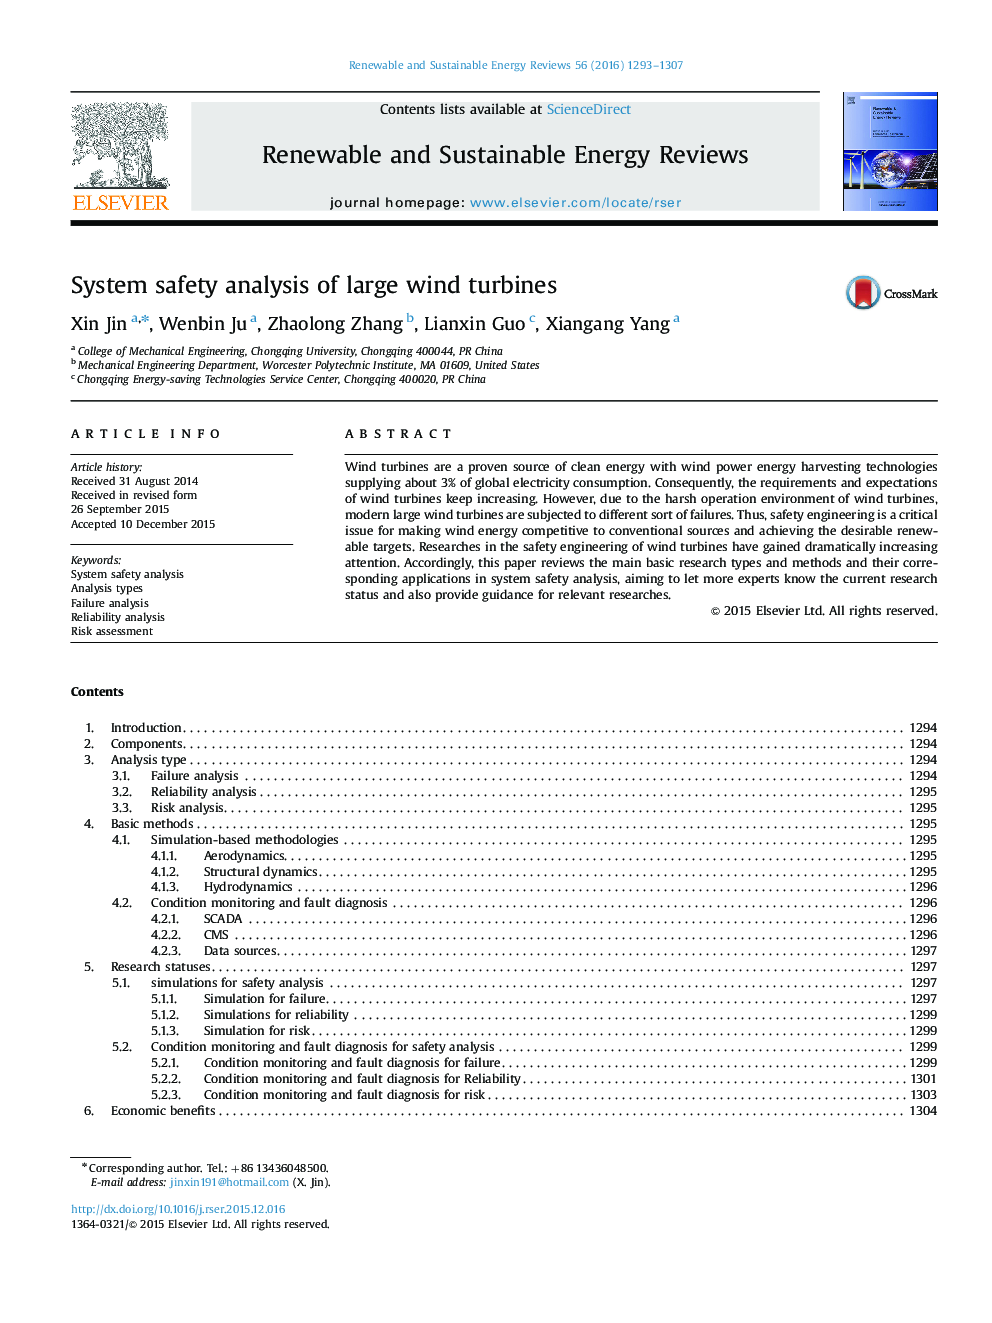 System safety analysis of large wind turbines